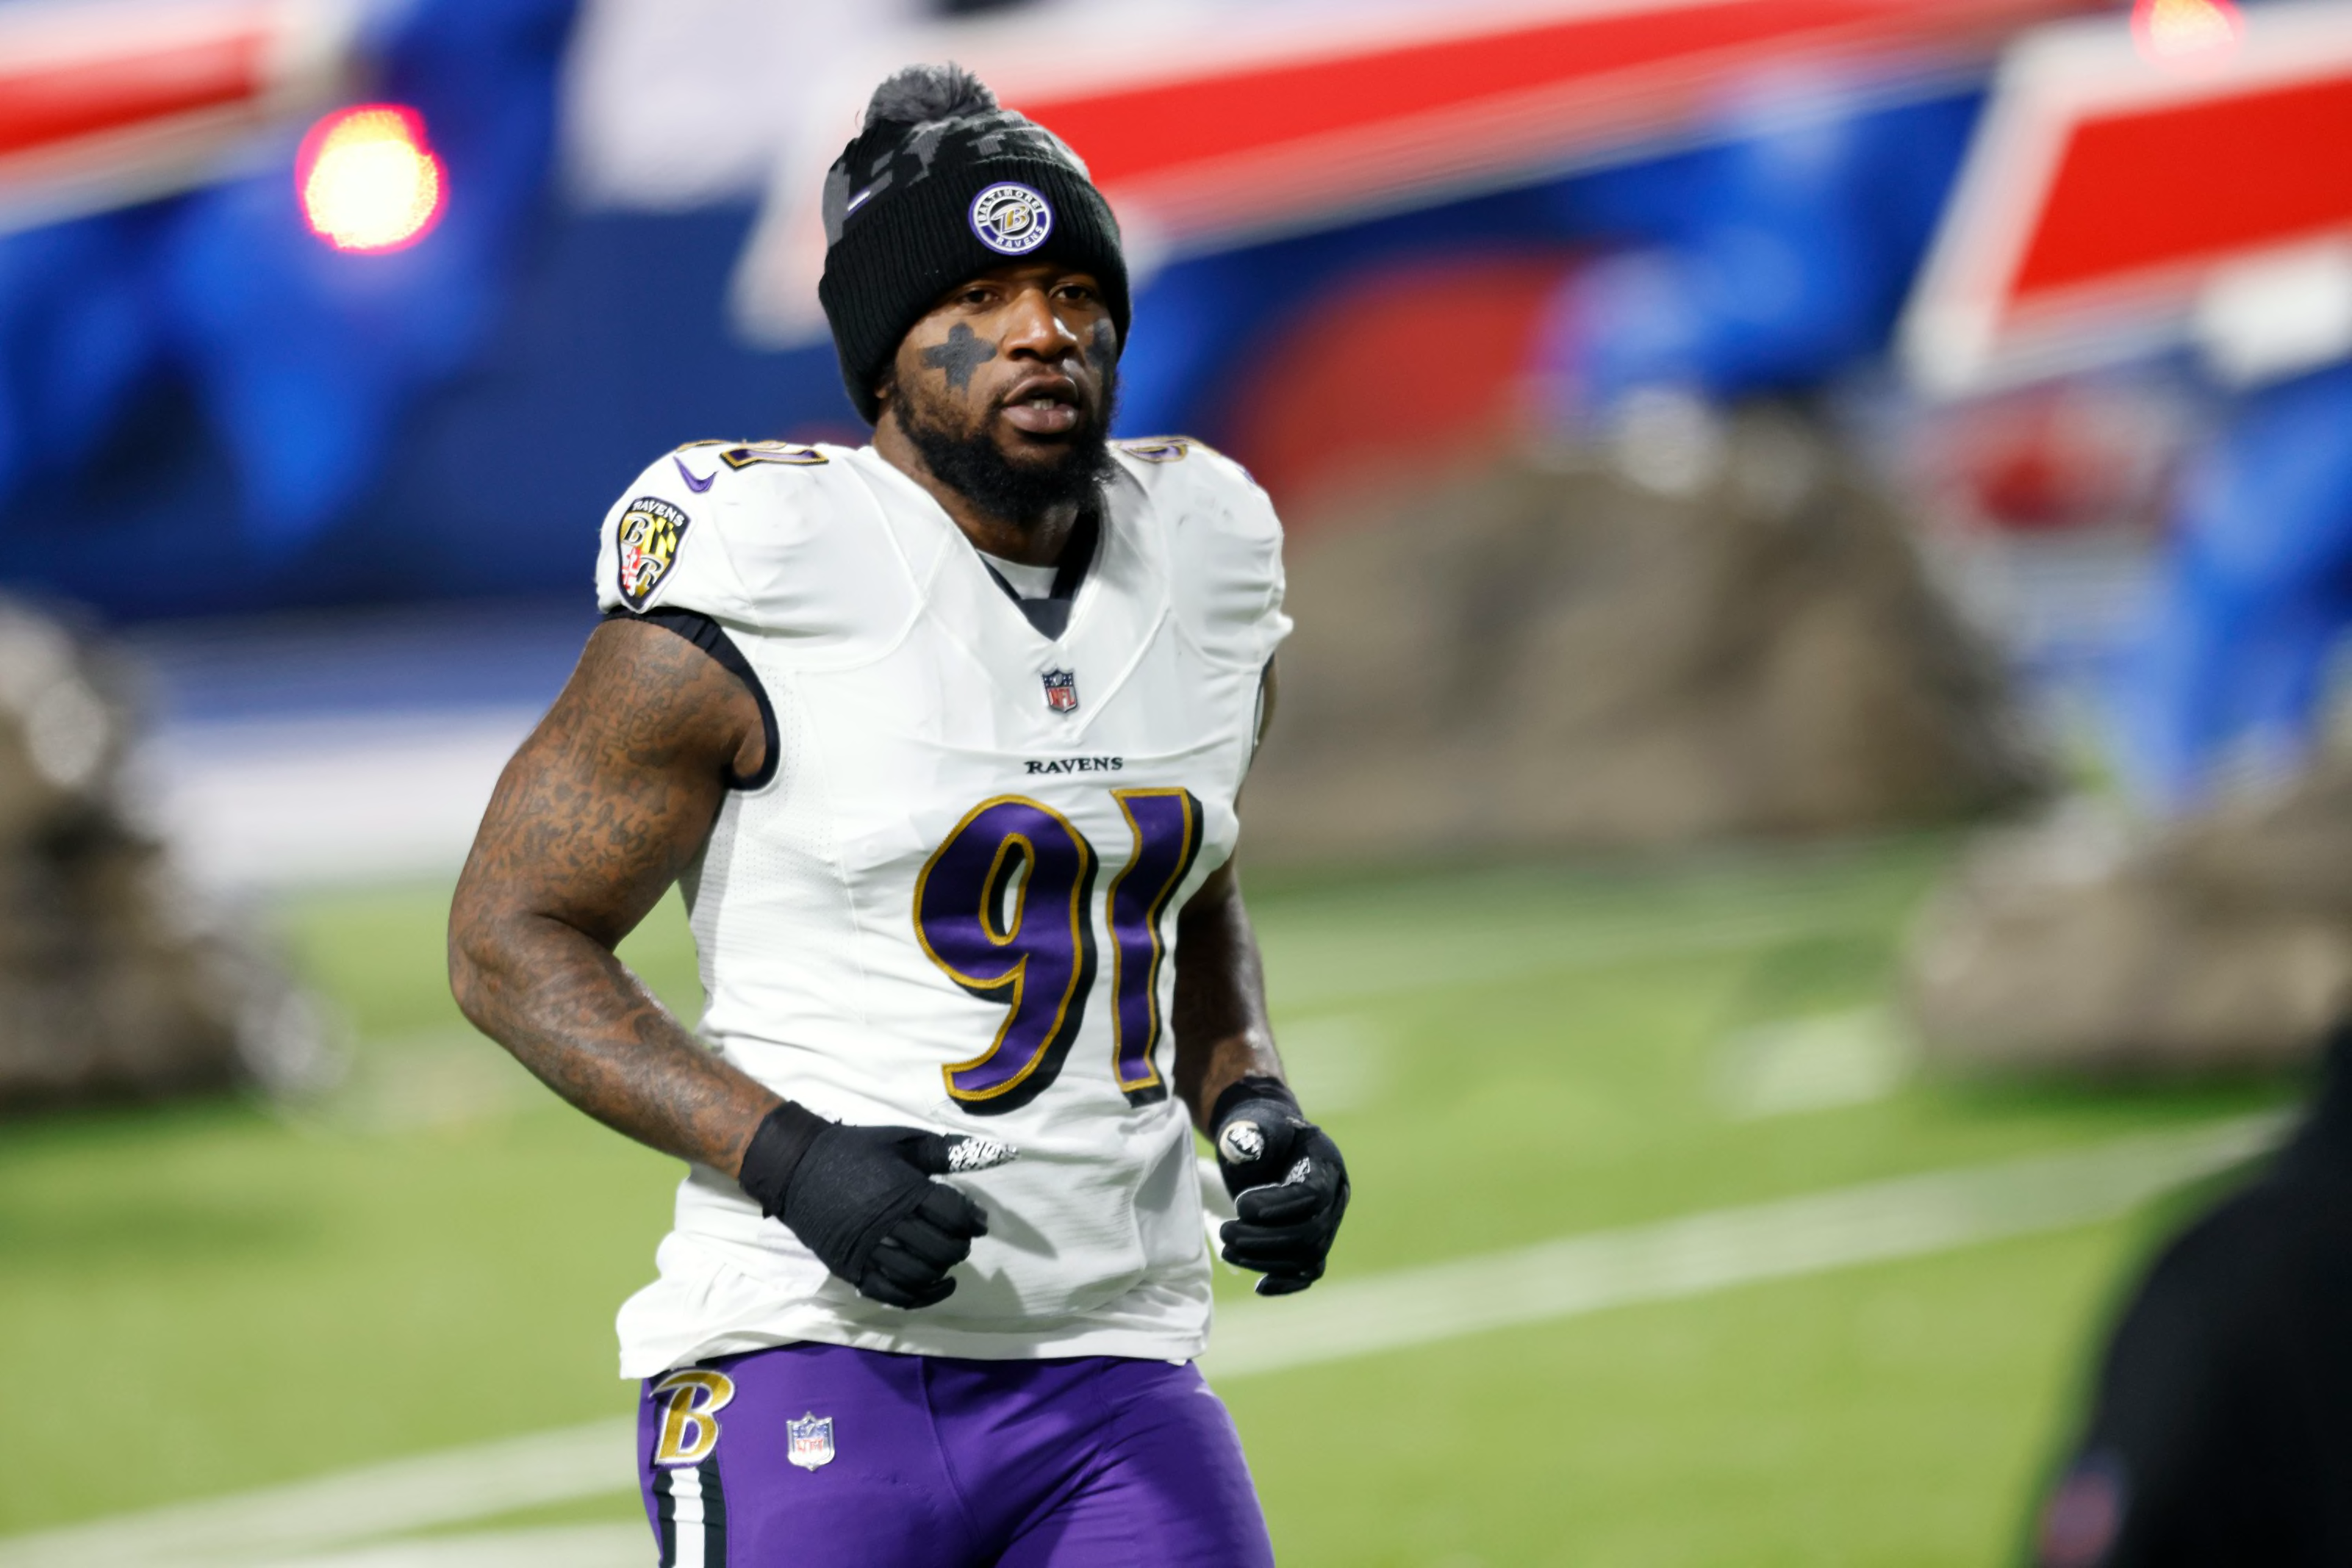 Ranking the Baltimore Ravens unrestricted free agents in 3 tiers